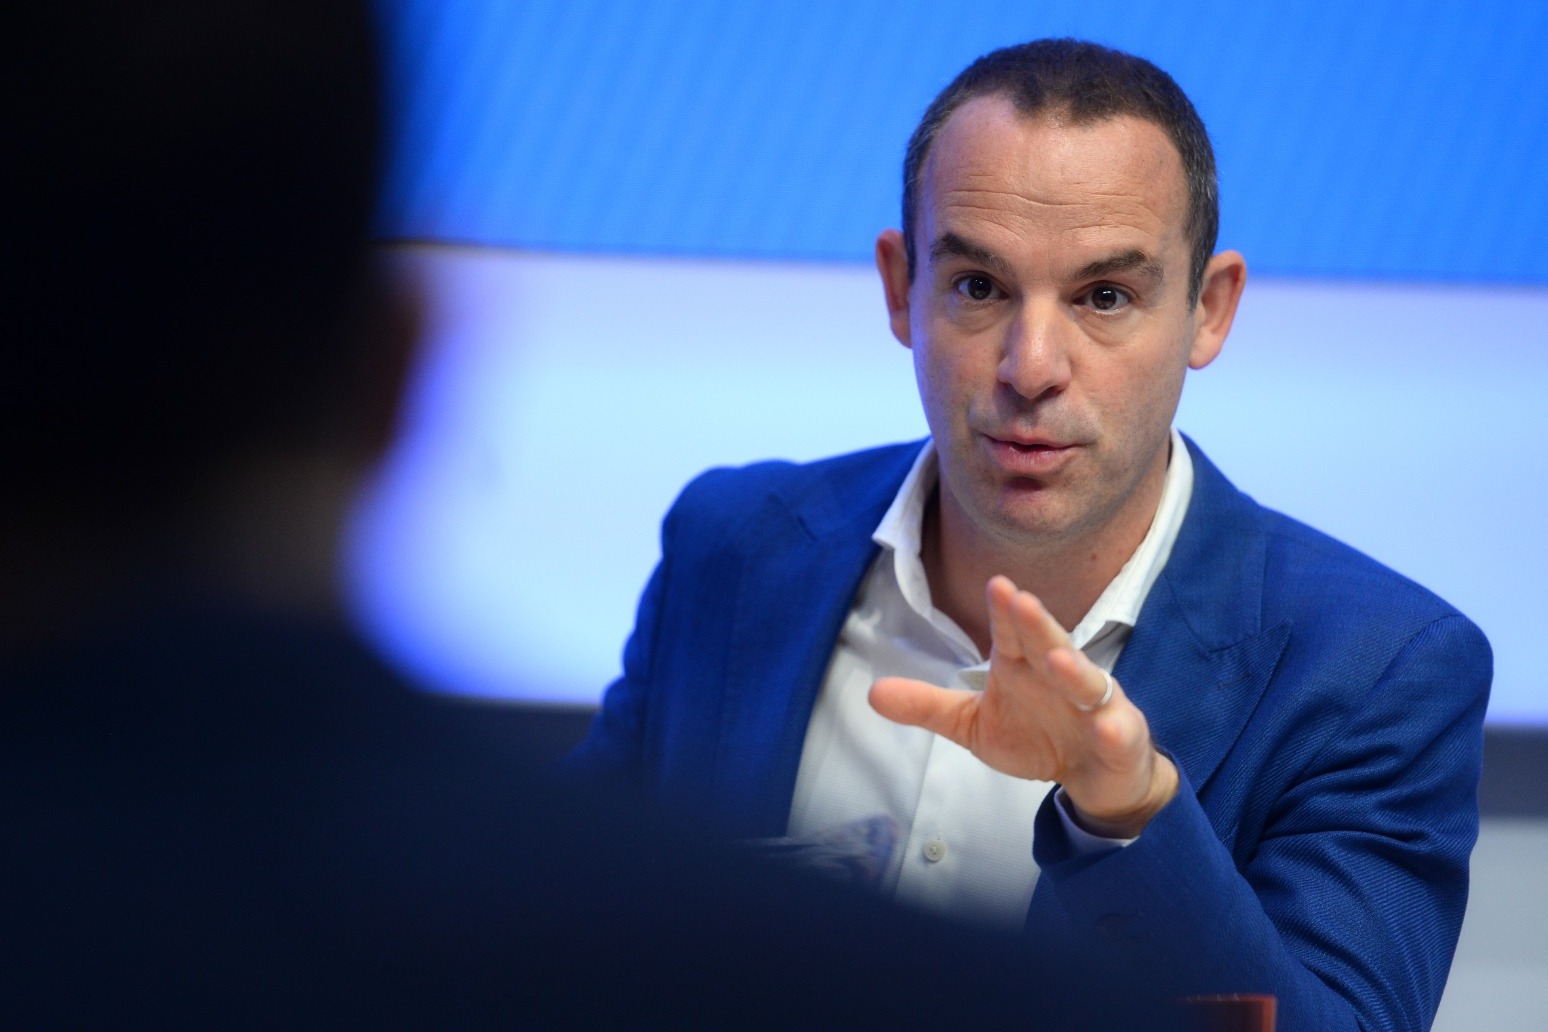 Martin Lewis on being a trusted voice: ‘I have my dark days mental health-wise’ 